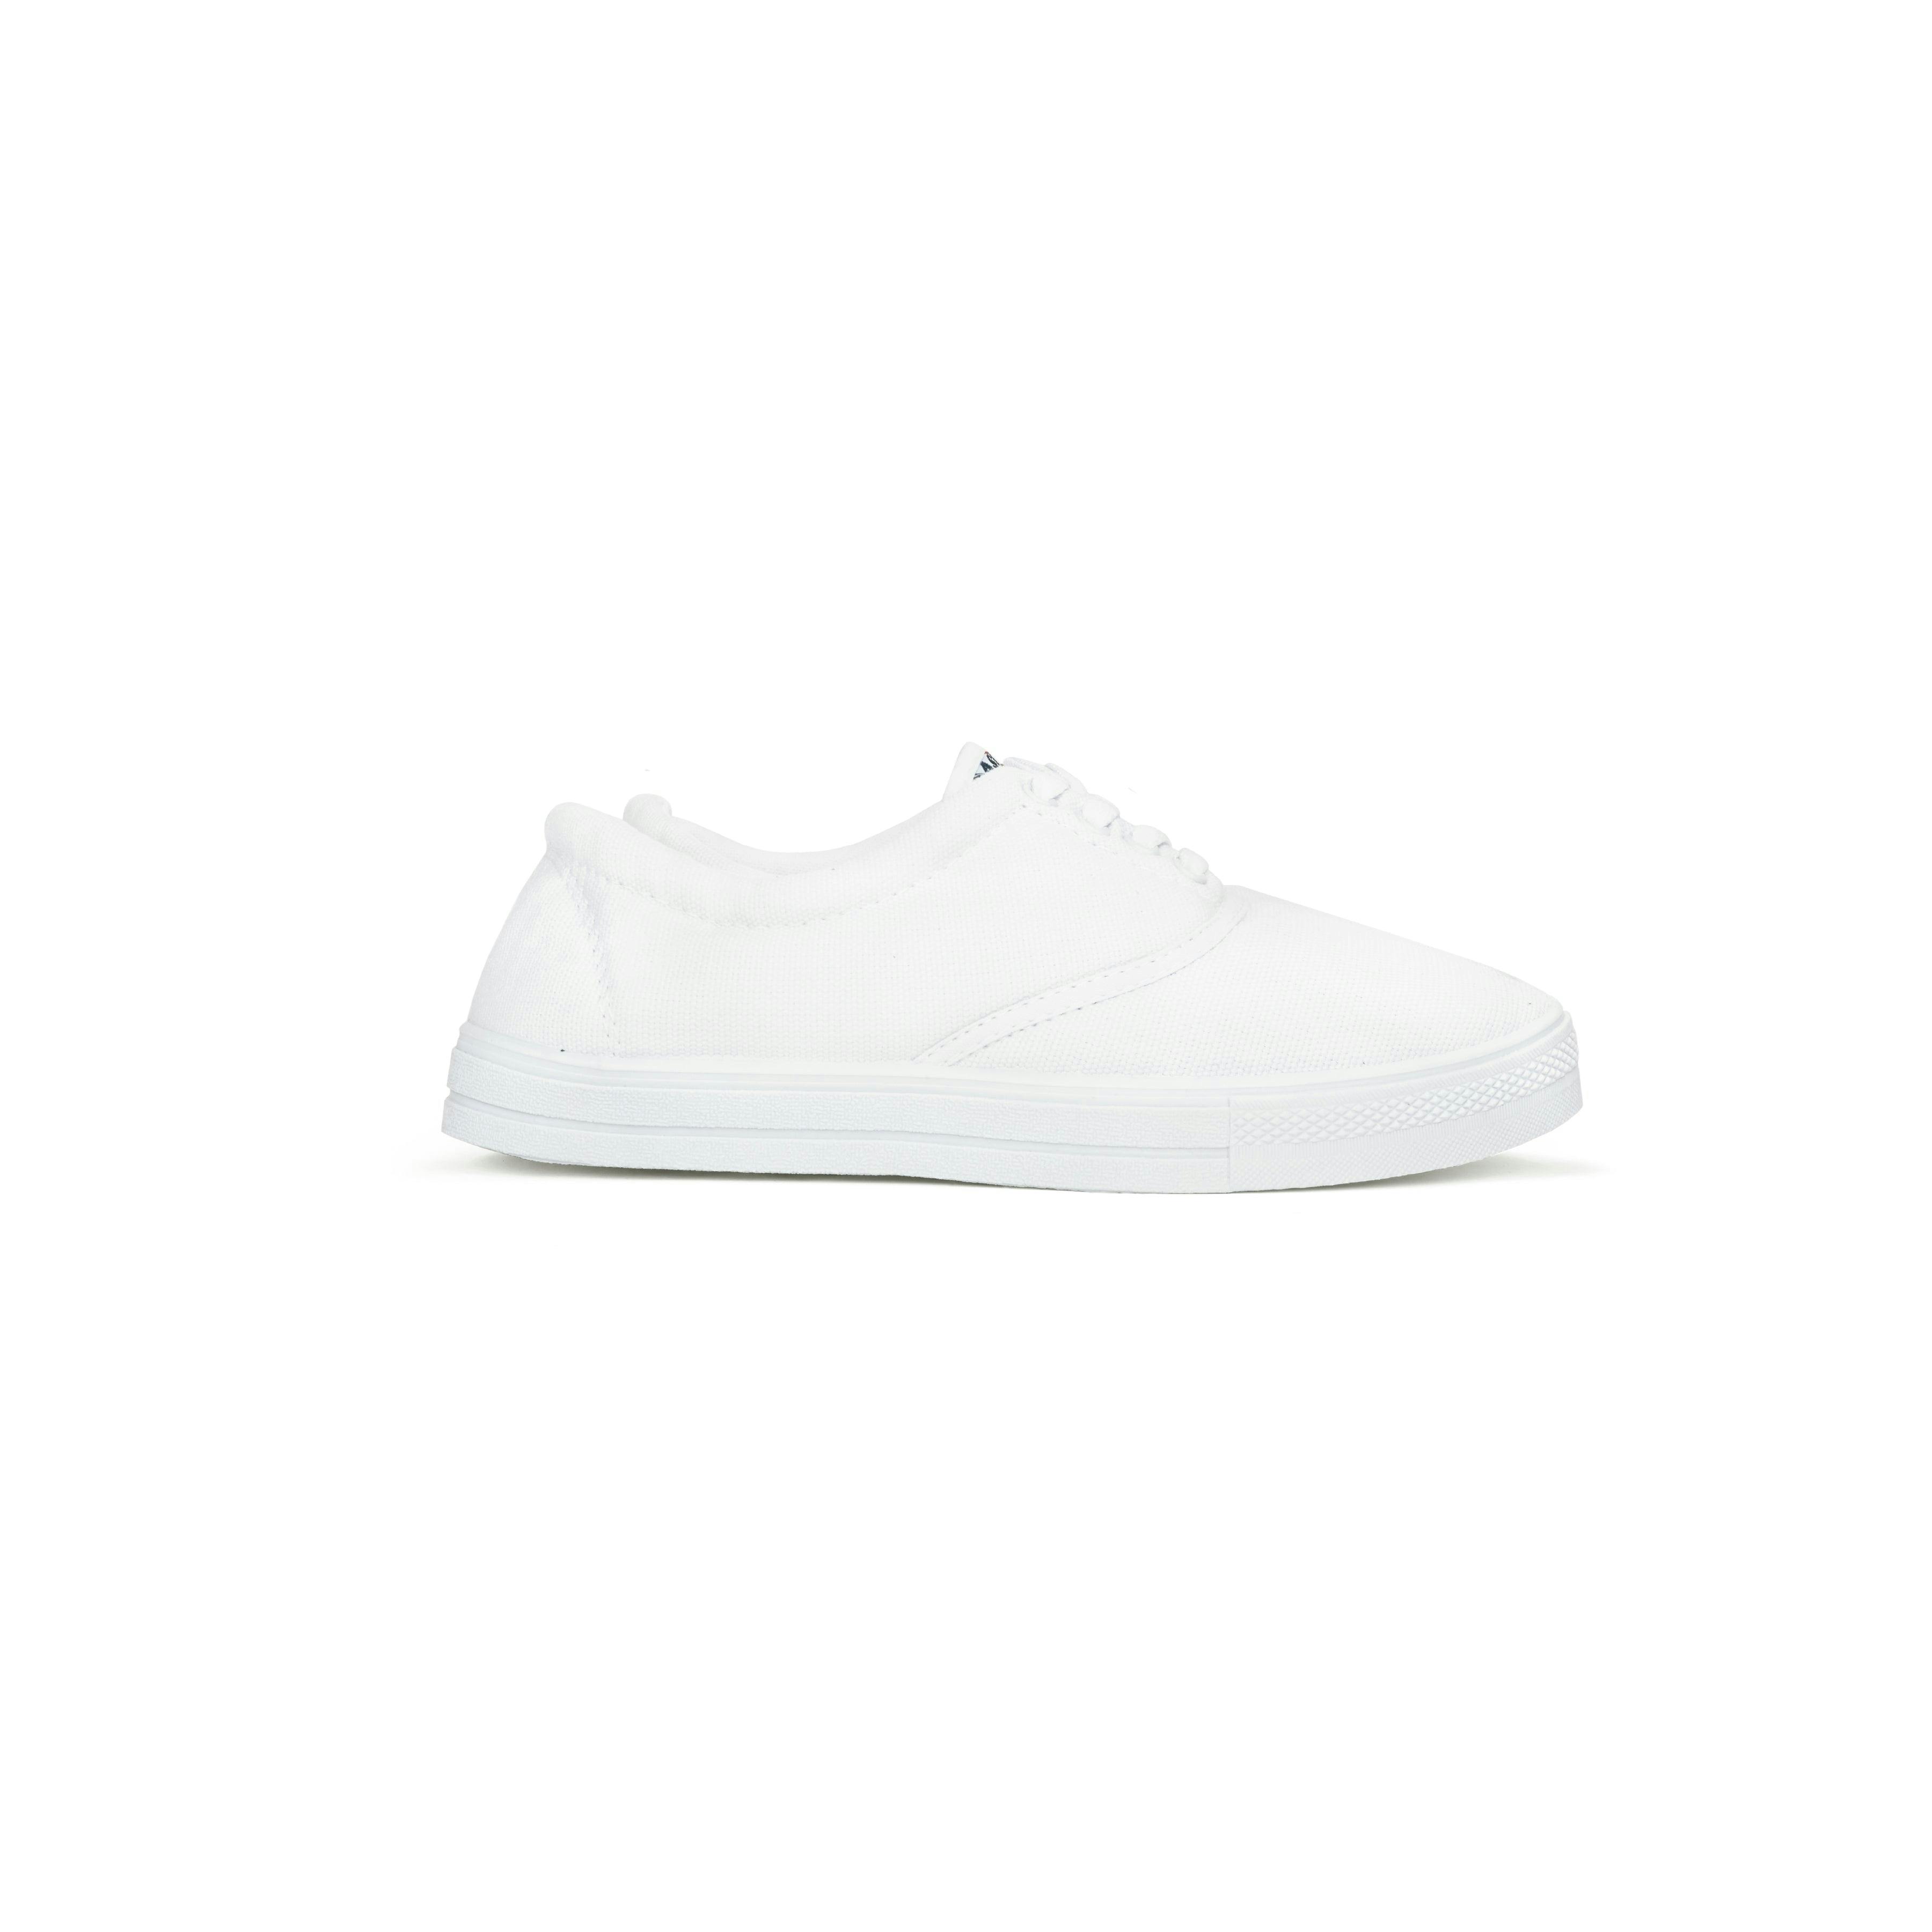 a pair of white sport shoes = 1 of 7